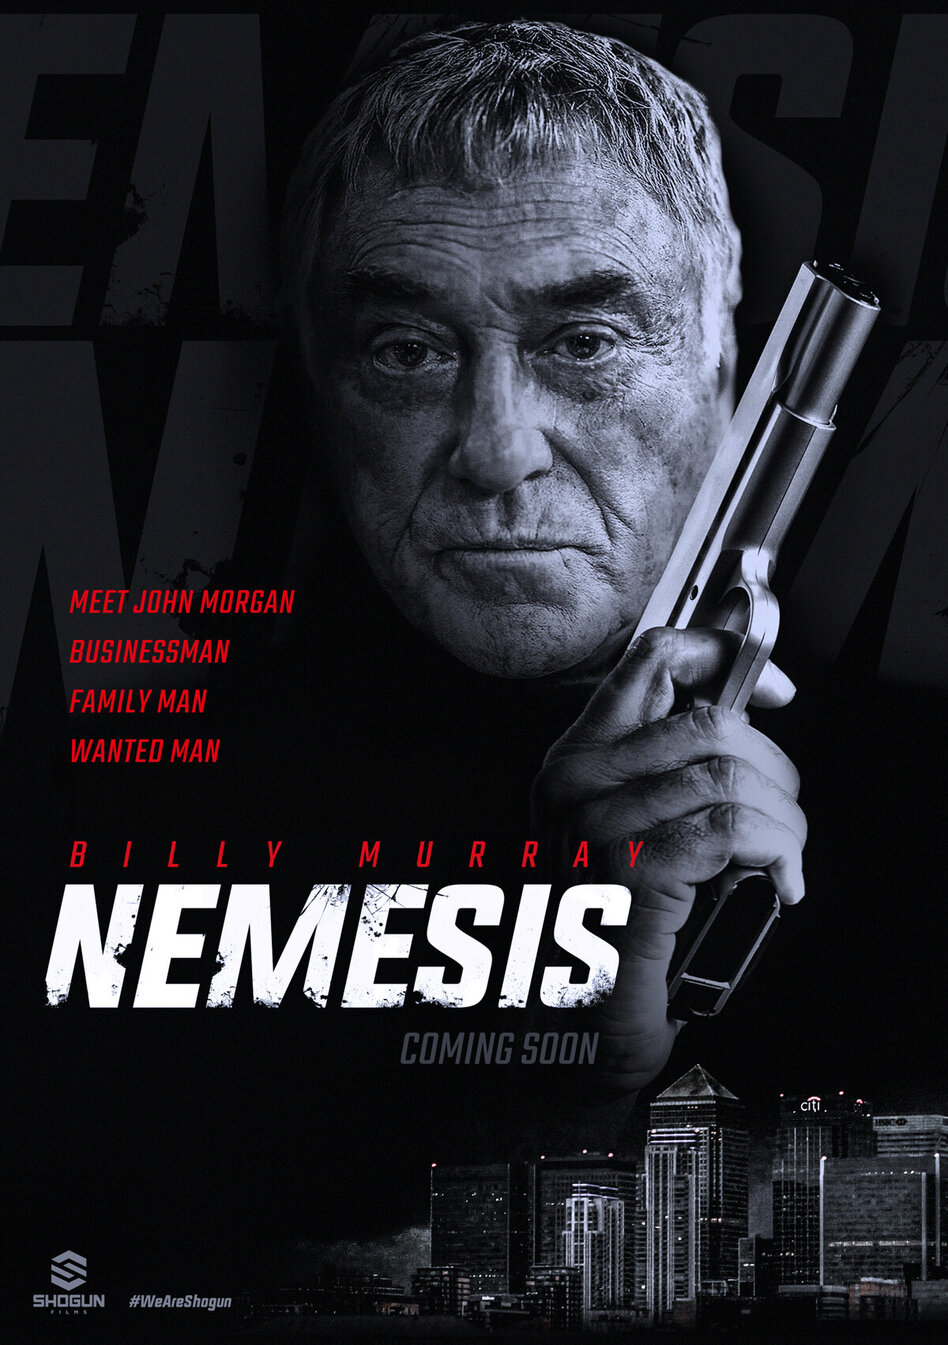  NEMESIS is currently scheduled to be released 29th March 2021. Directed by James Crow  Written by Adam Stephen Kelly  Produced by Jonathan Sothcott